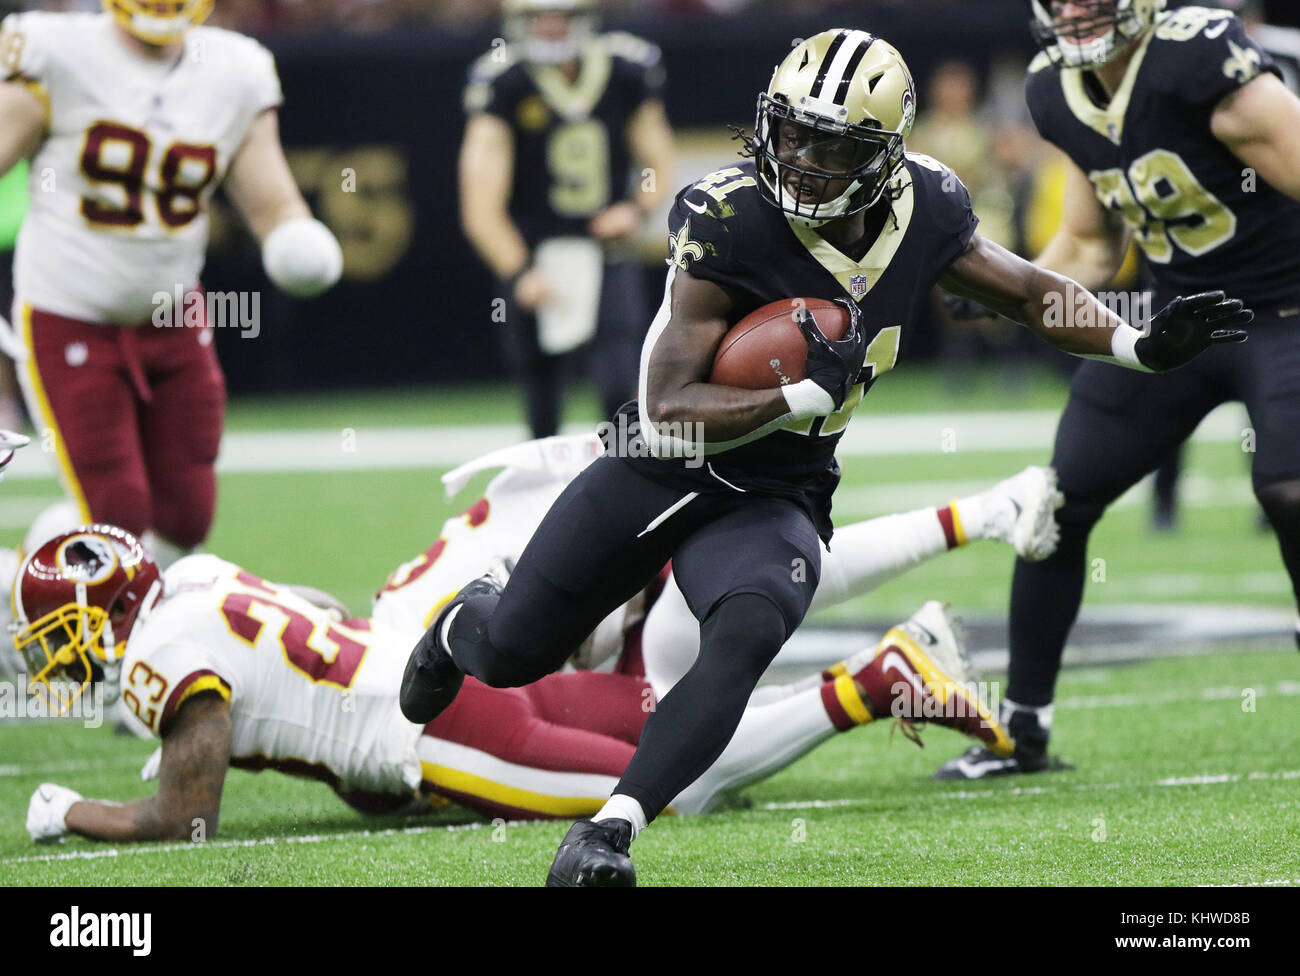 New Orleans, LOUISIANA, USA. 19th Nov, 2017. New Orleans Saints running back Alvin Kamara runs the ball against the Washington Redskins at the Mercedes-Benz Superdome in New Orleans, Louisiana USA on November 19, 2017. The Saints beat the Redskin 34-31 in overtime. Credit: Dan Anderson/ZUMA Wire/Alamy Live News Stock Photo